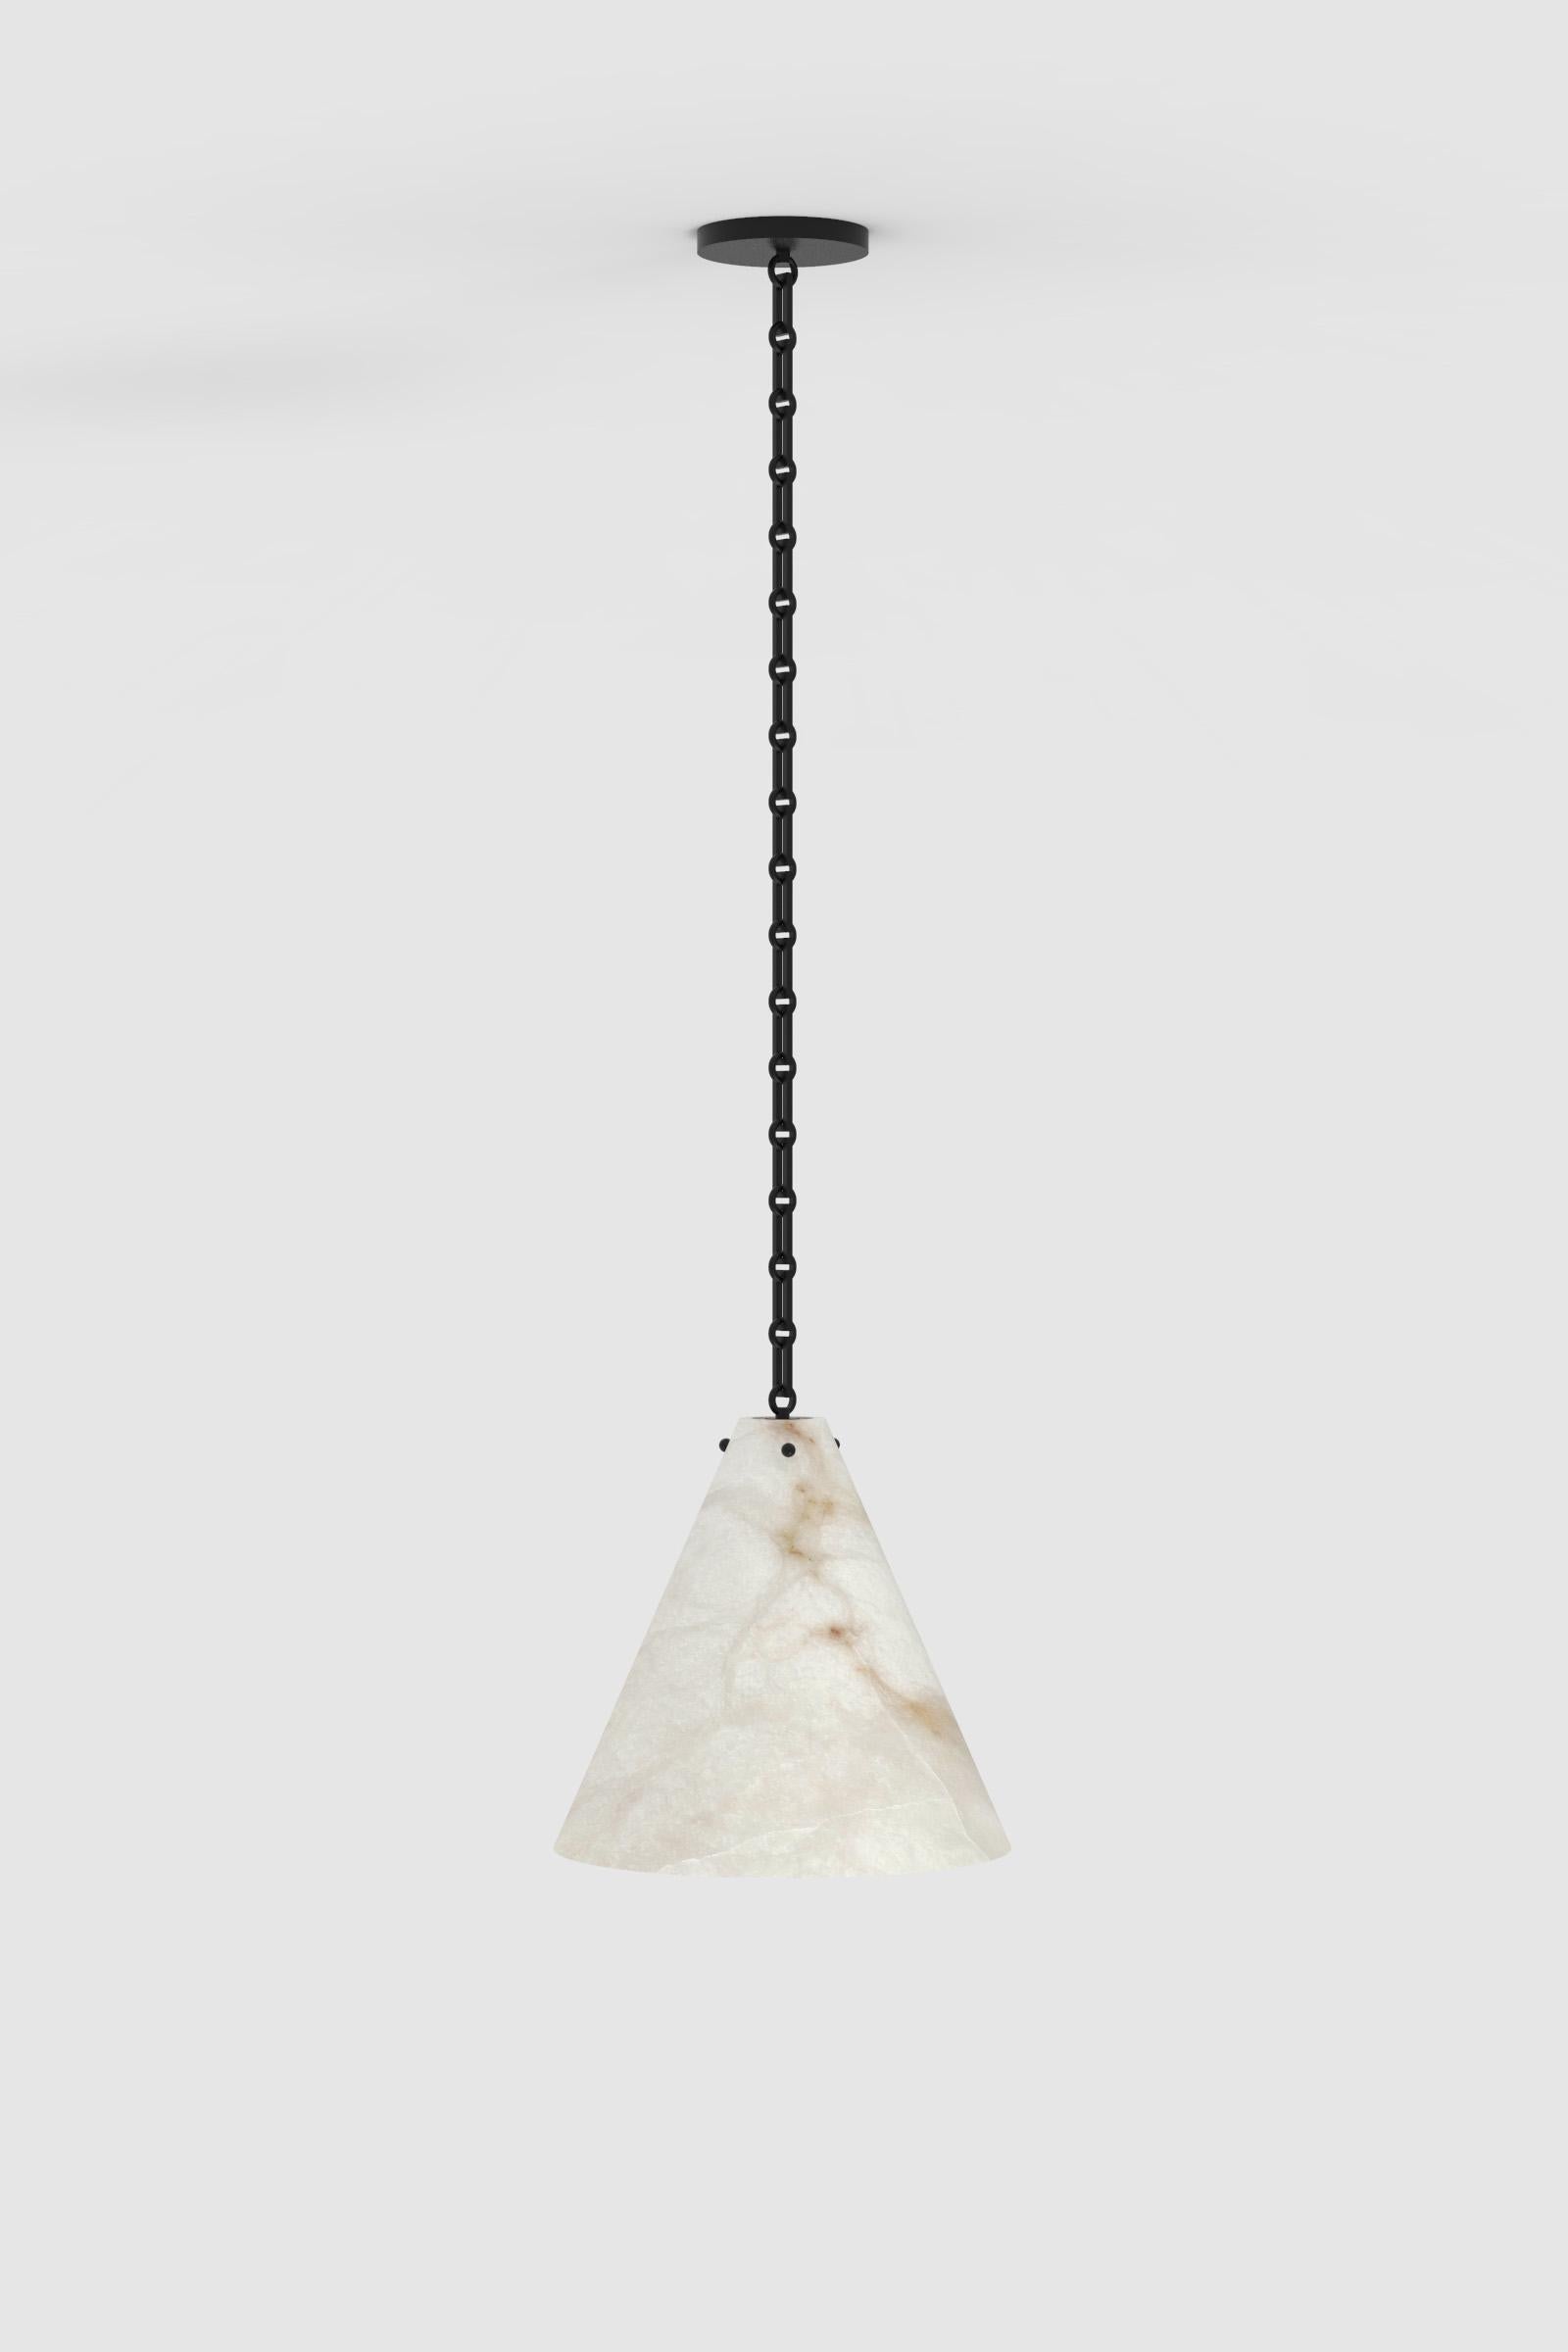 Orphan Work 202A large pendant BLK
Shown in alabaster with blackened brass
Available in brushed brass and blackened brass
Measures: 15” Height x 16” Diameter 
Height and width to order*
Canopy 6